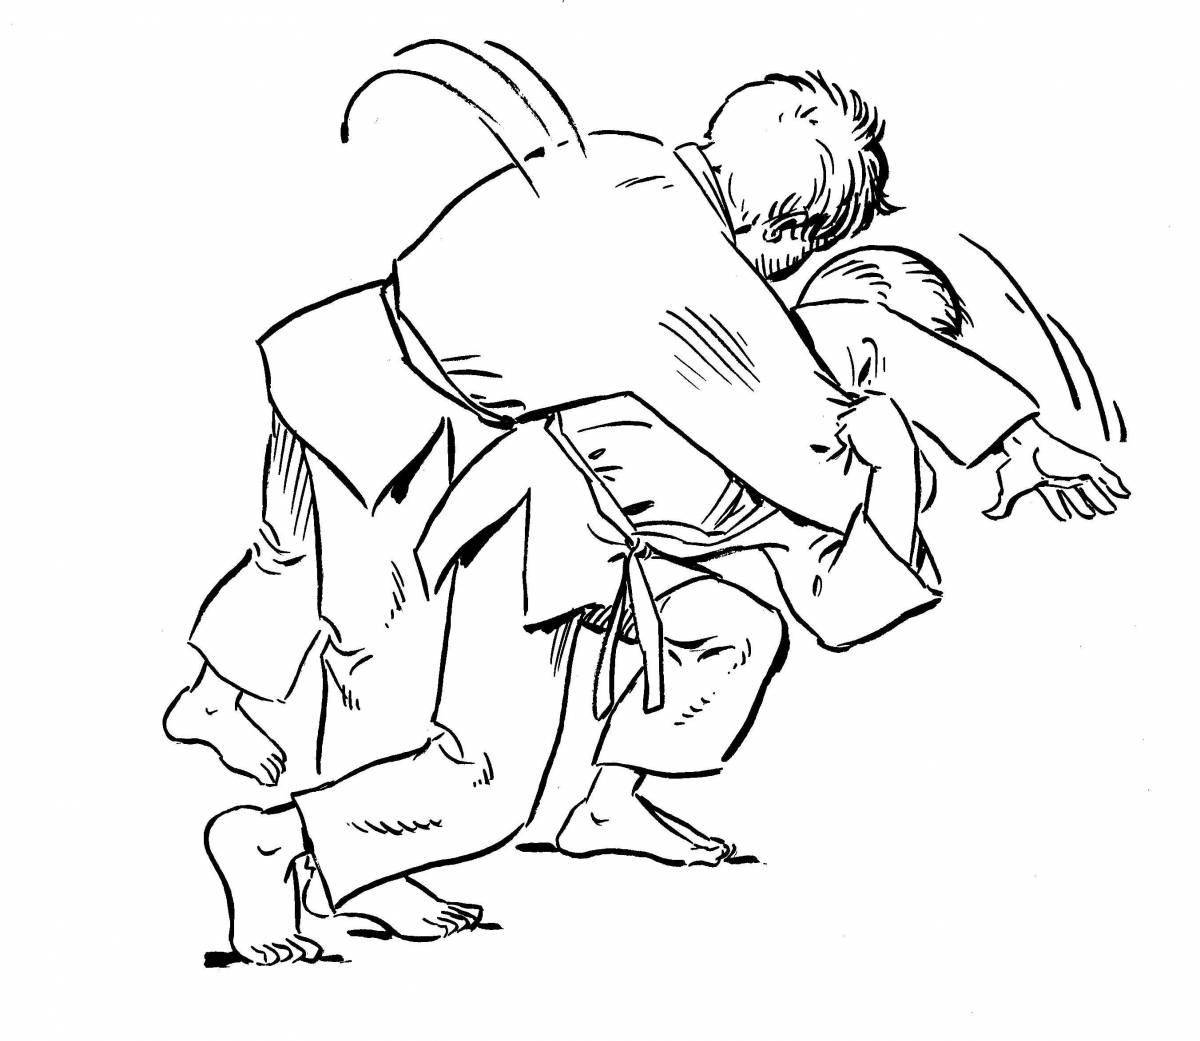 Fantastic judo coloring pages for kids